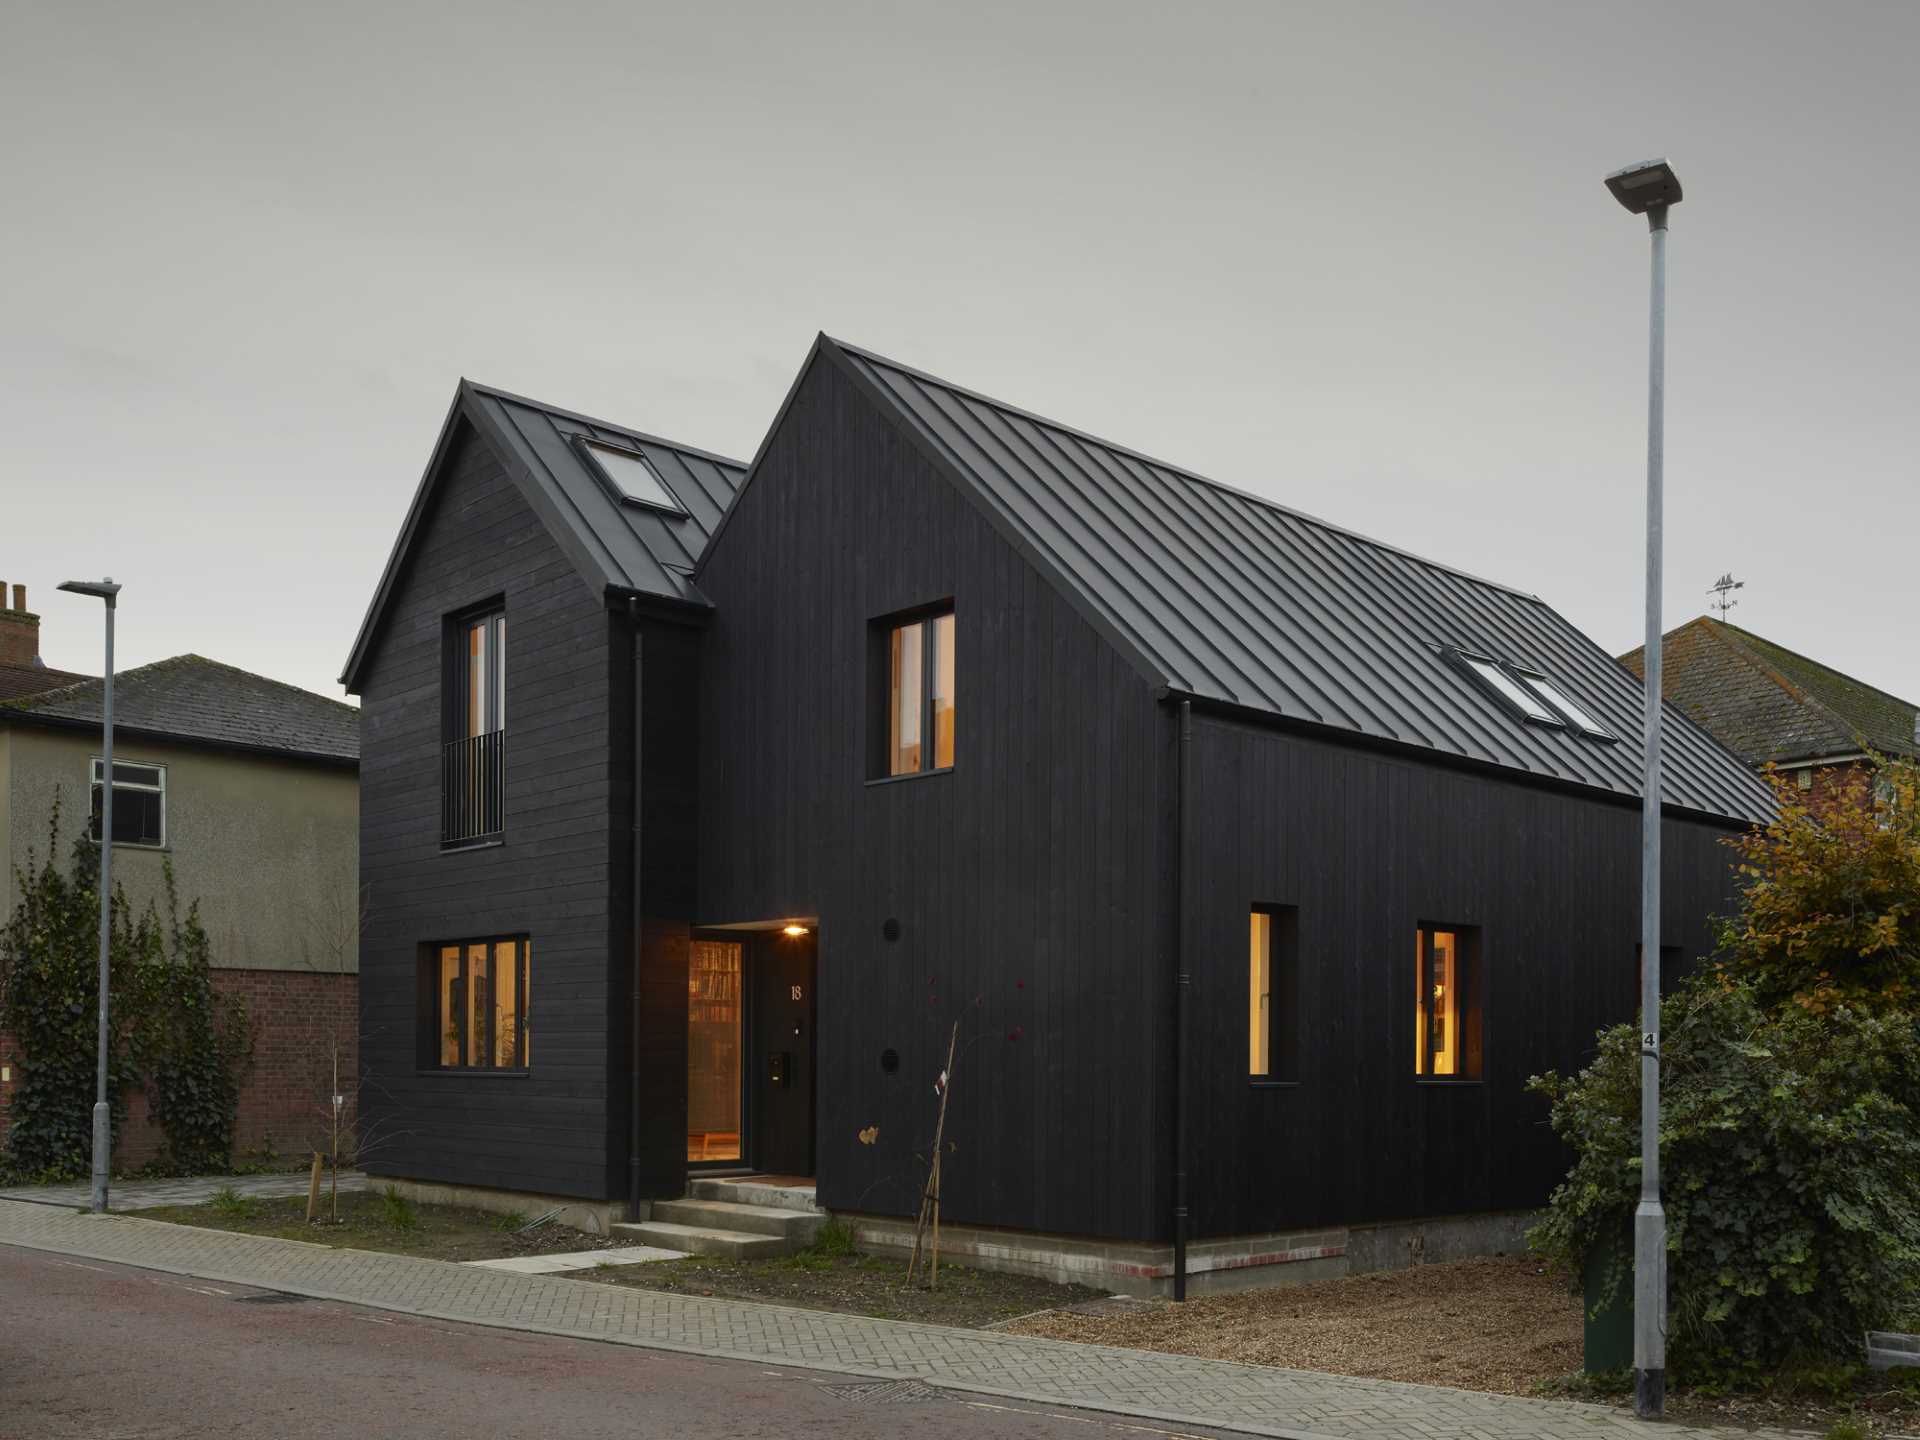 The exterior of the home features a double-gable roof, timber cladding in a dark colour, and metal cladding on the roof.